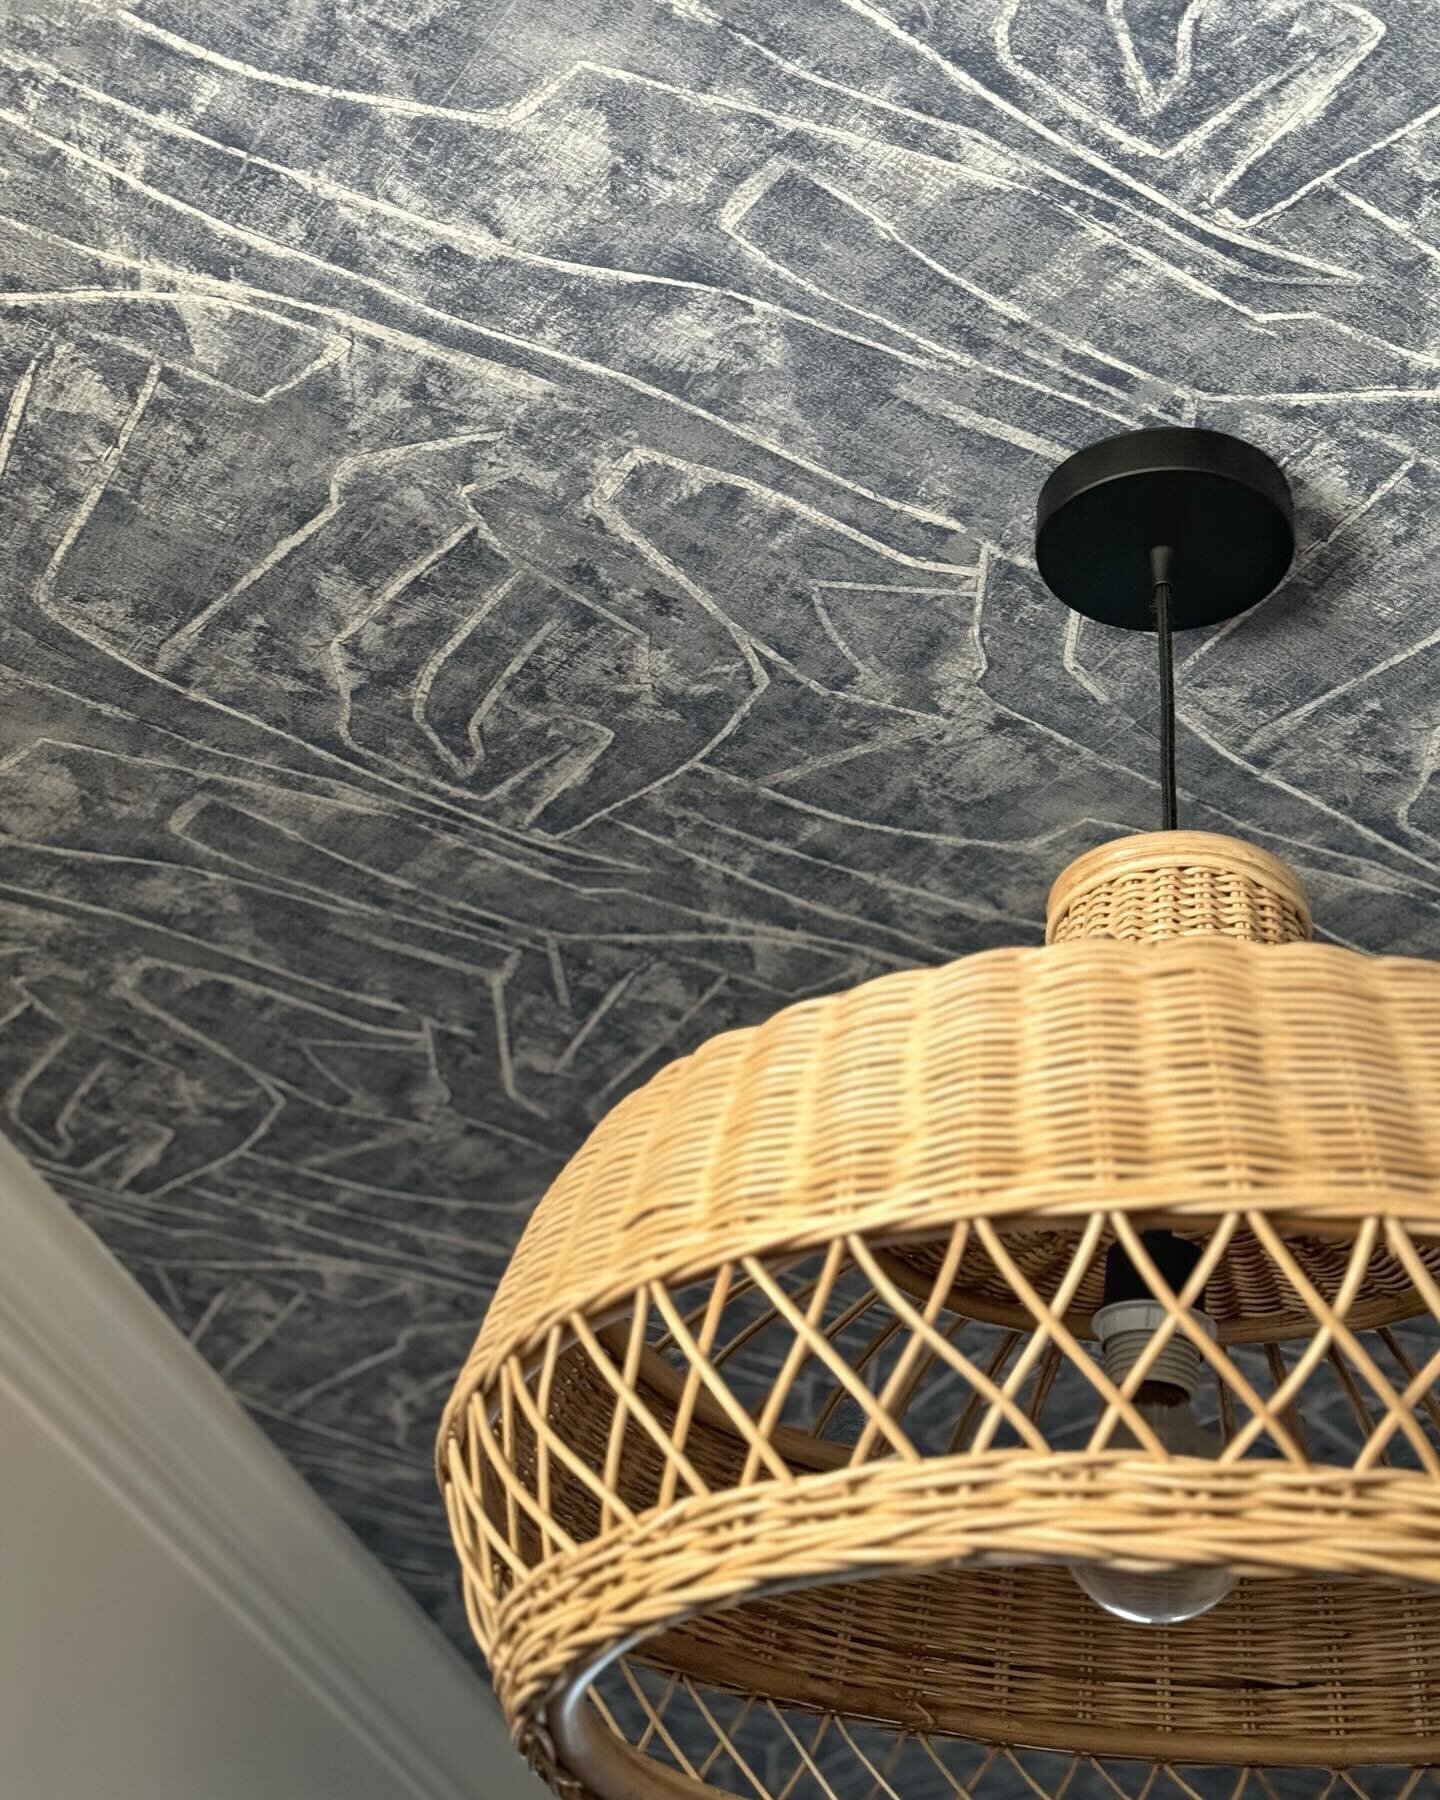 There is a time and a place for wallpaper. Luckily, the time is now and the place is this foyer ceiling 🤍💙
Are you a fan of ceiling wallpaper?